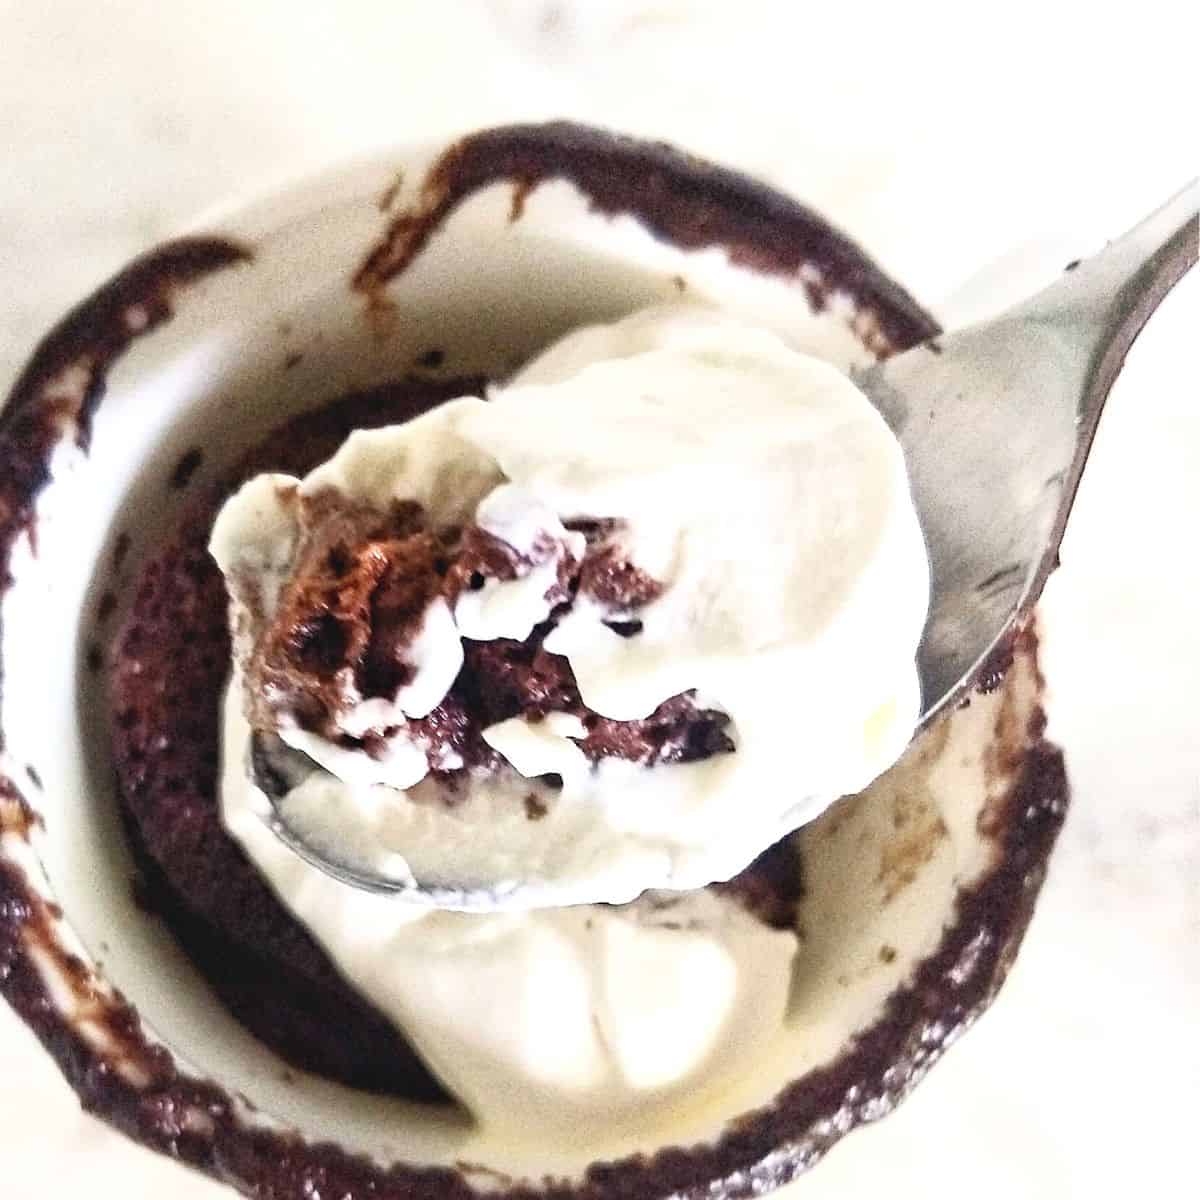 Chocolate mug cake - 21Keto and Low-Carb Desserts Without Erythritol